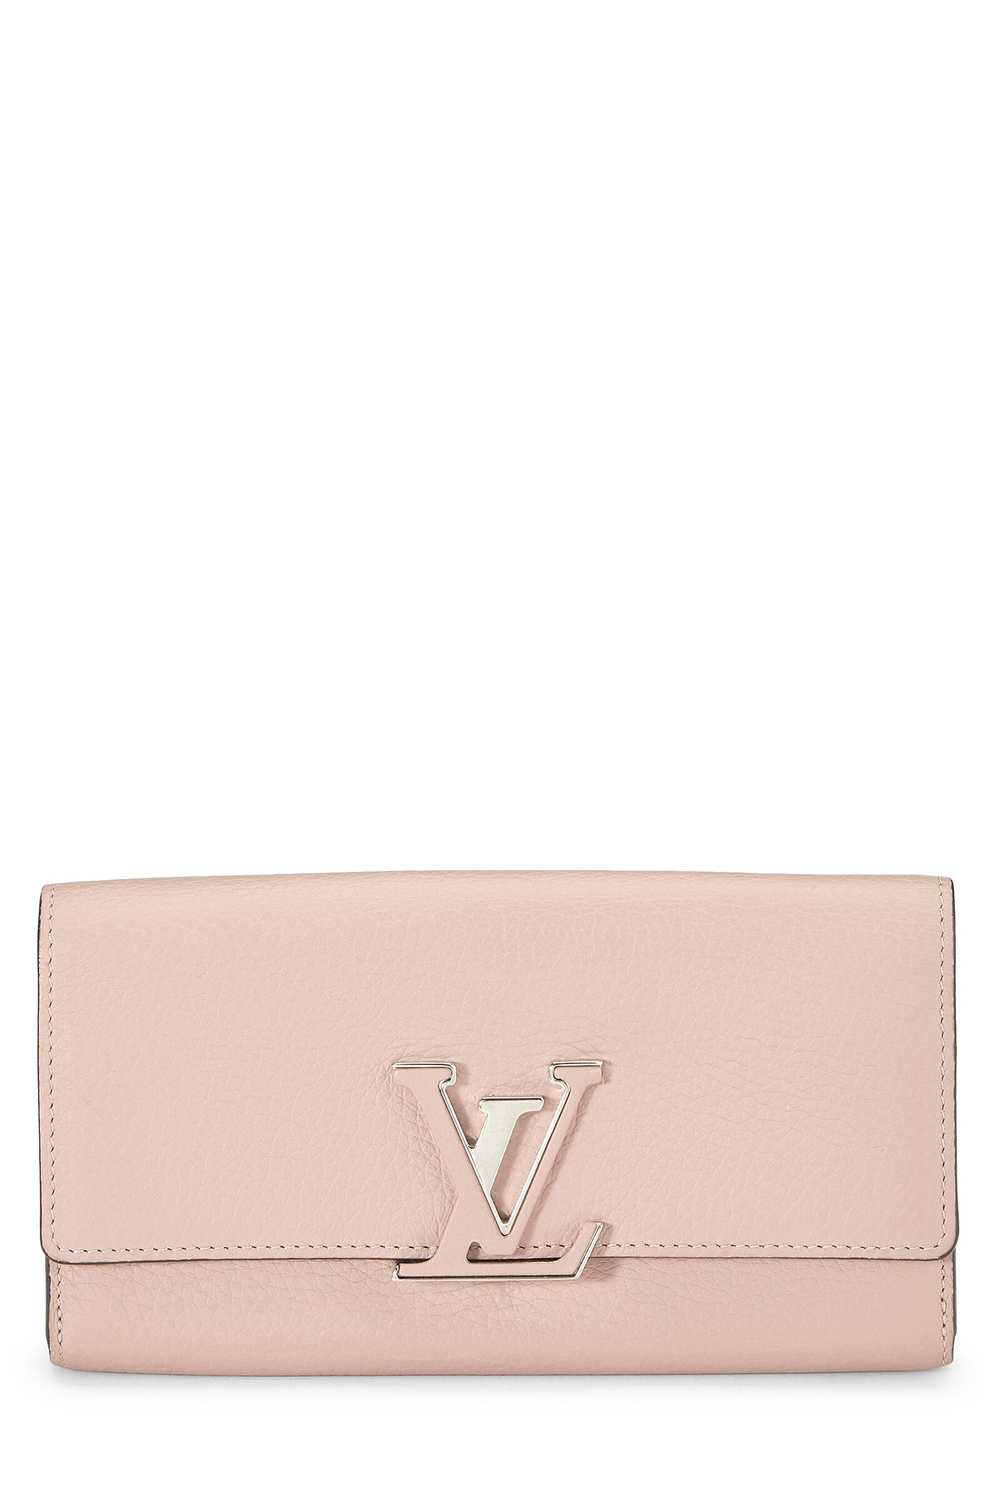 Pink Taurillon Leather Capucines Wallet - image 1